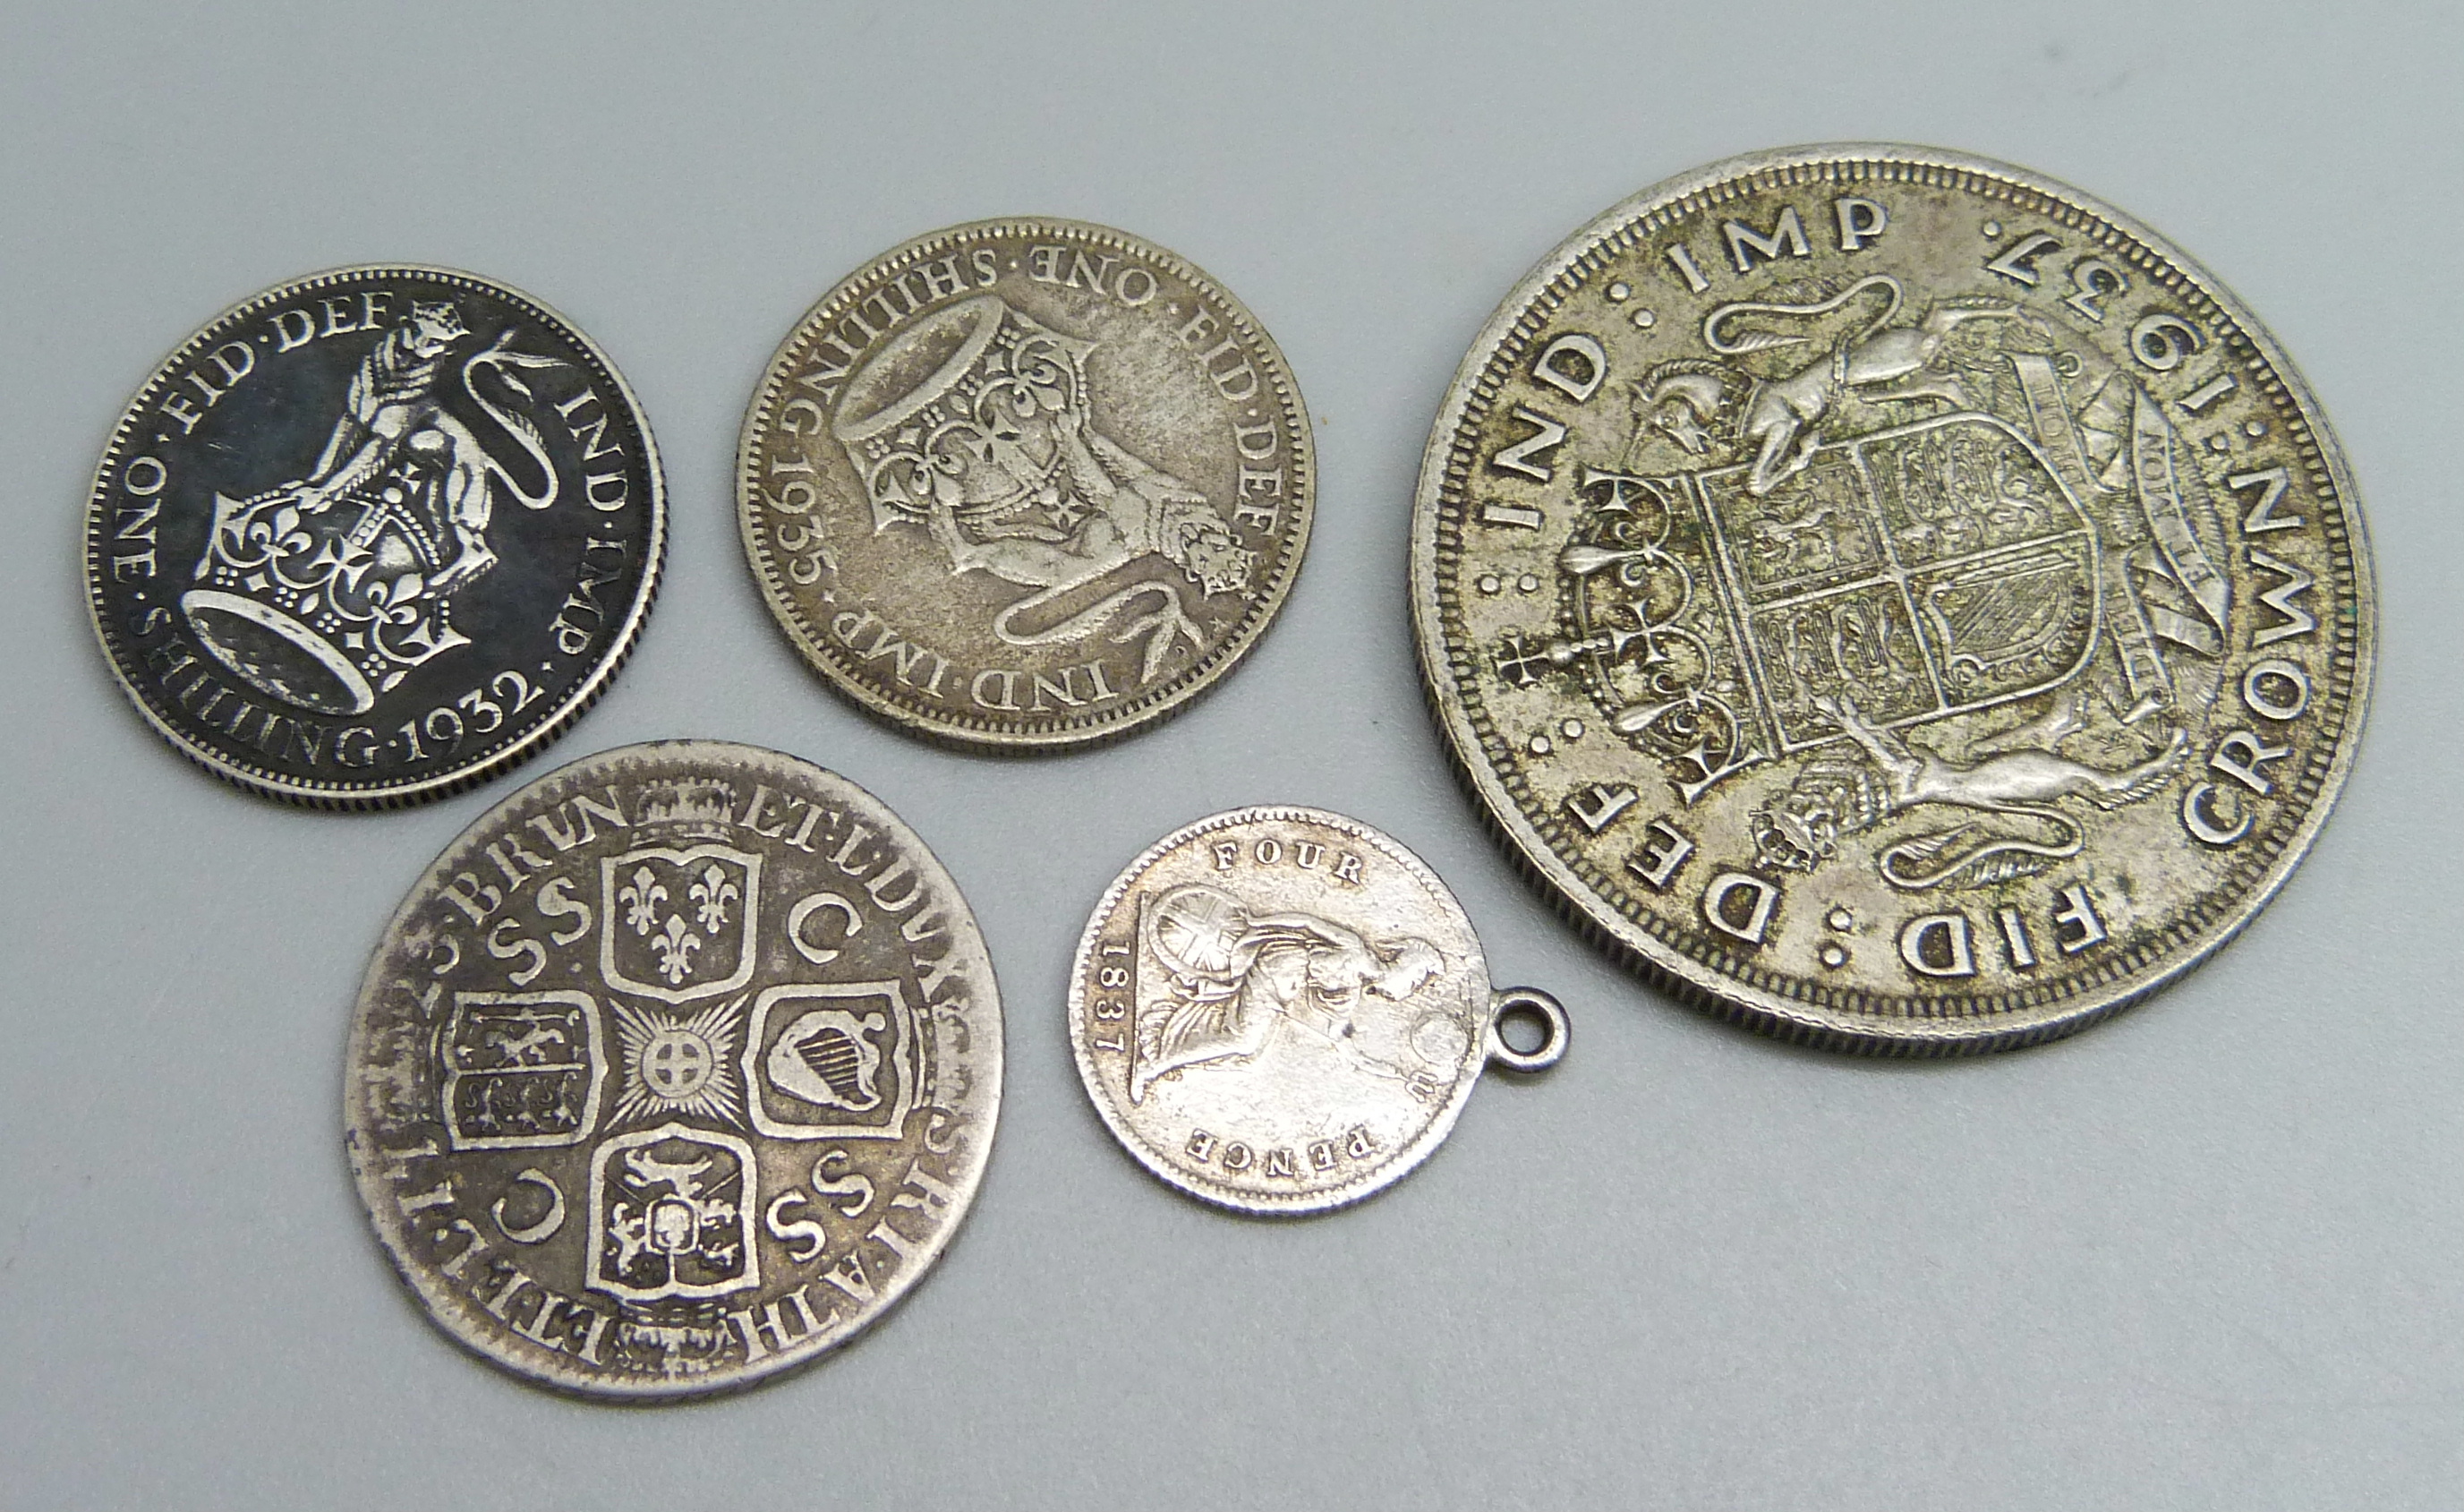 Silver coins including a 1723 SSC shilling and an 1837 four pence - Image 3 of 3